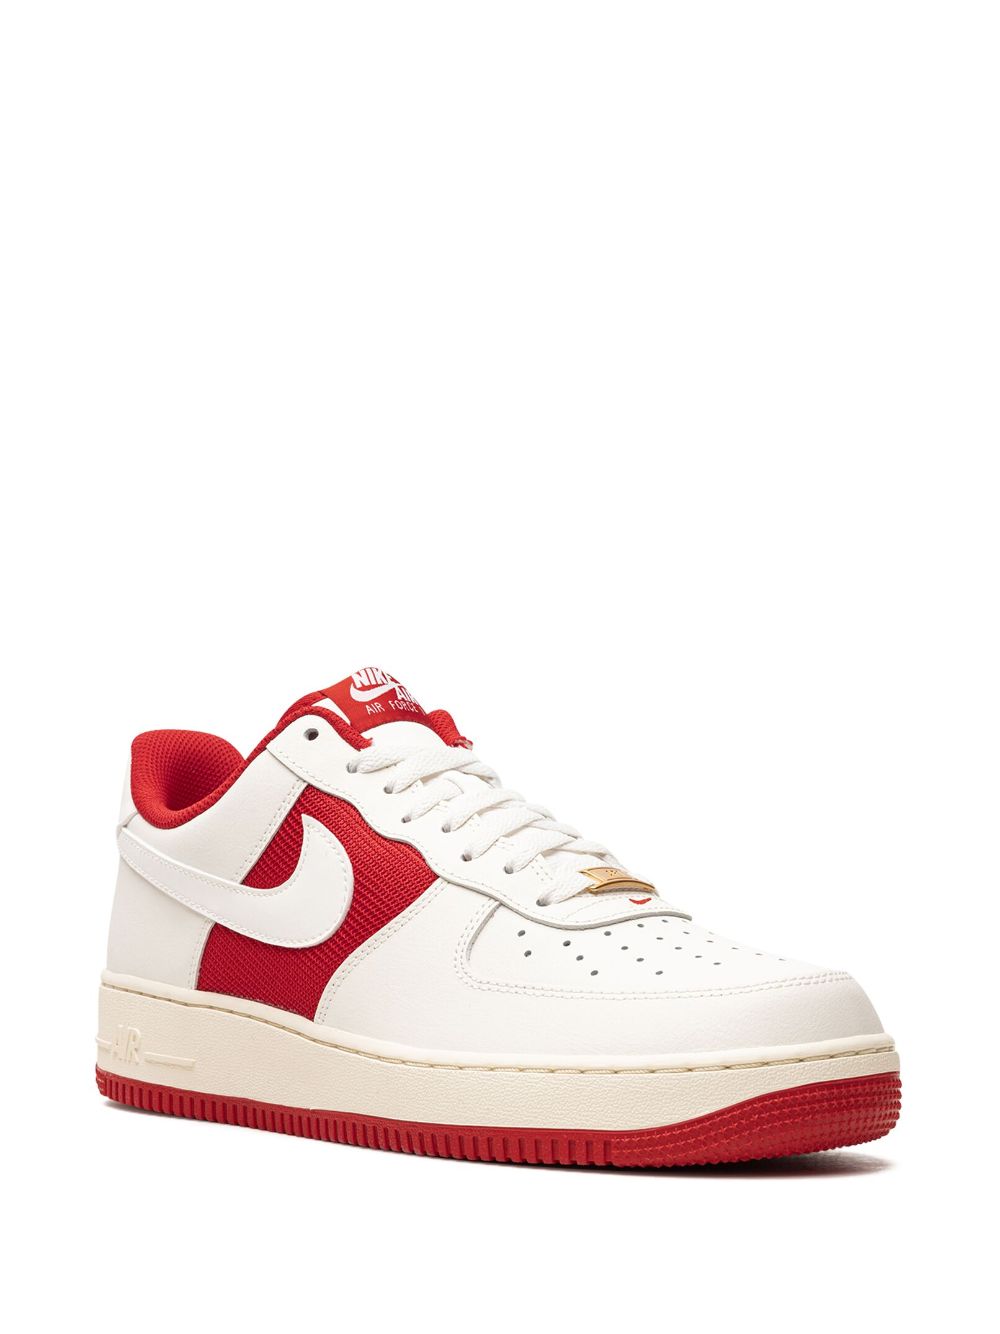 Shop Nike Air Force 1 Low "athletic Dept." Sneakers In White